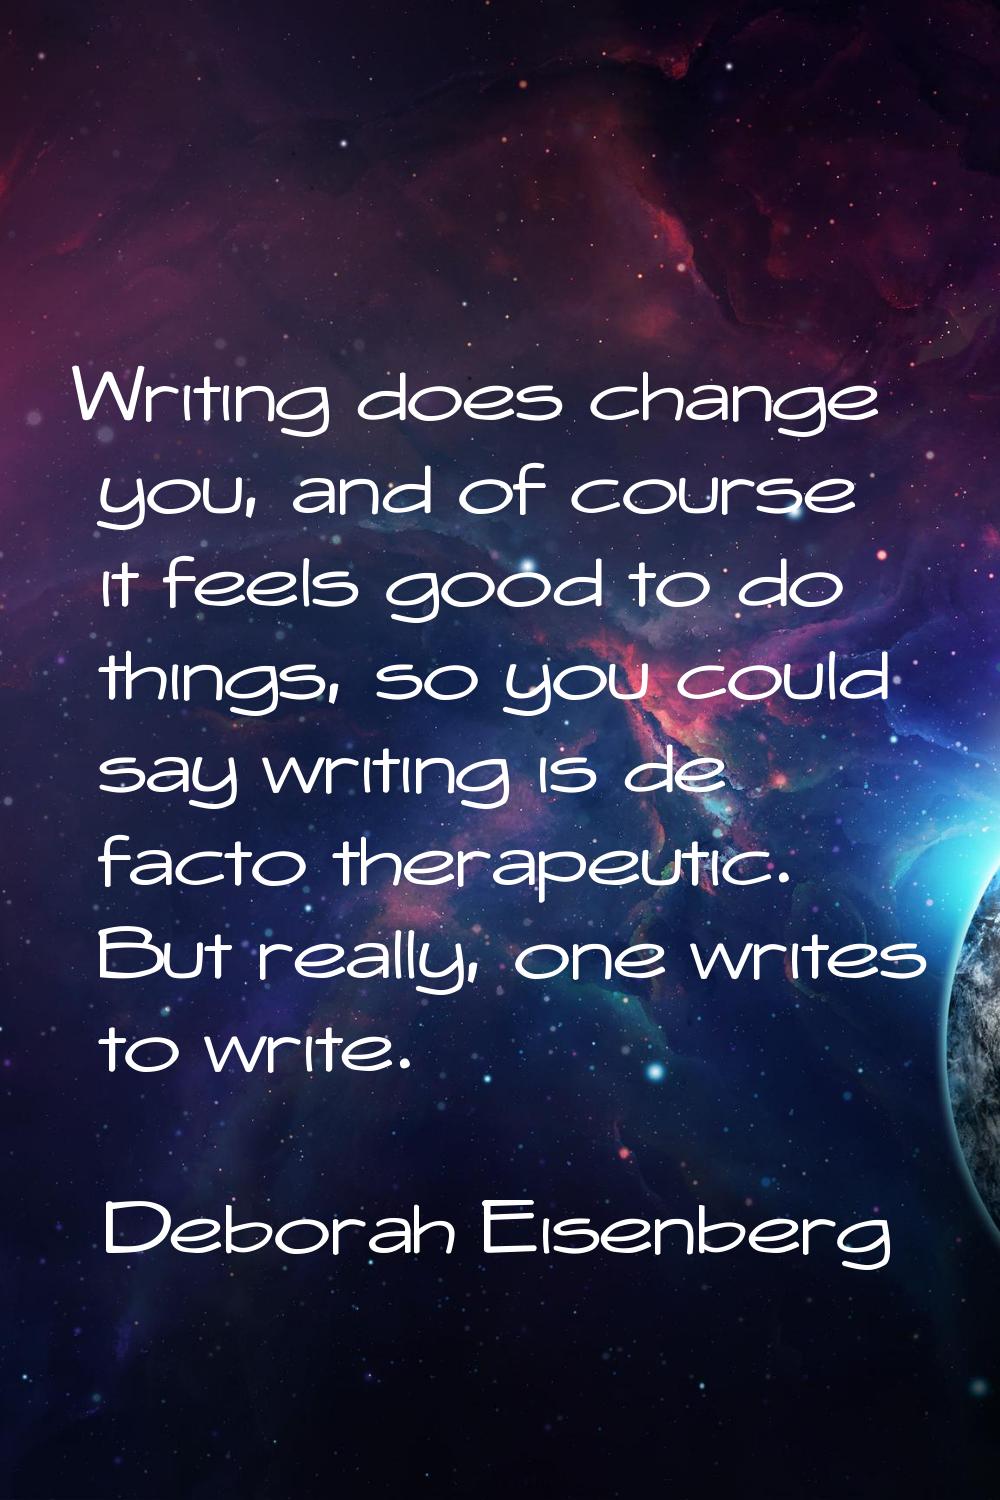 Writing does change you, and of course it feels good to do things, so you could say writing is de f